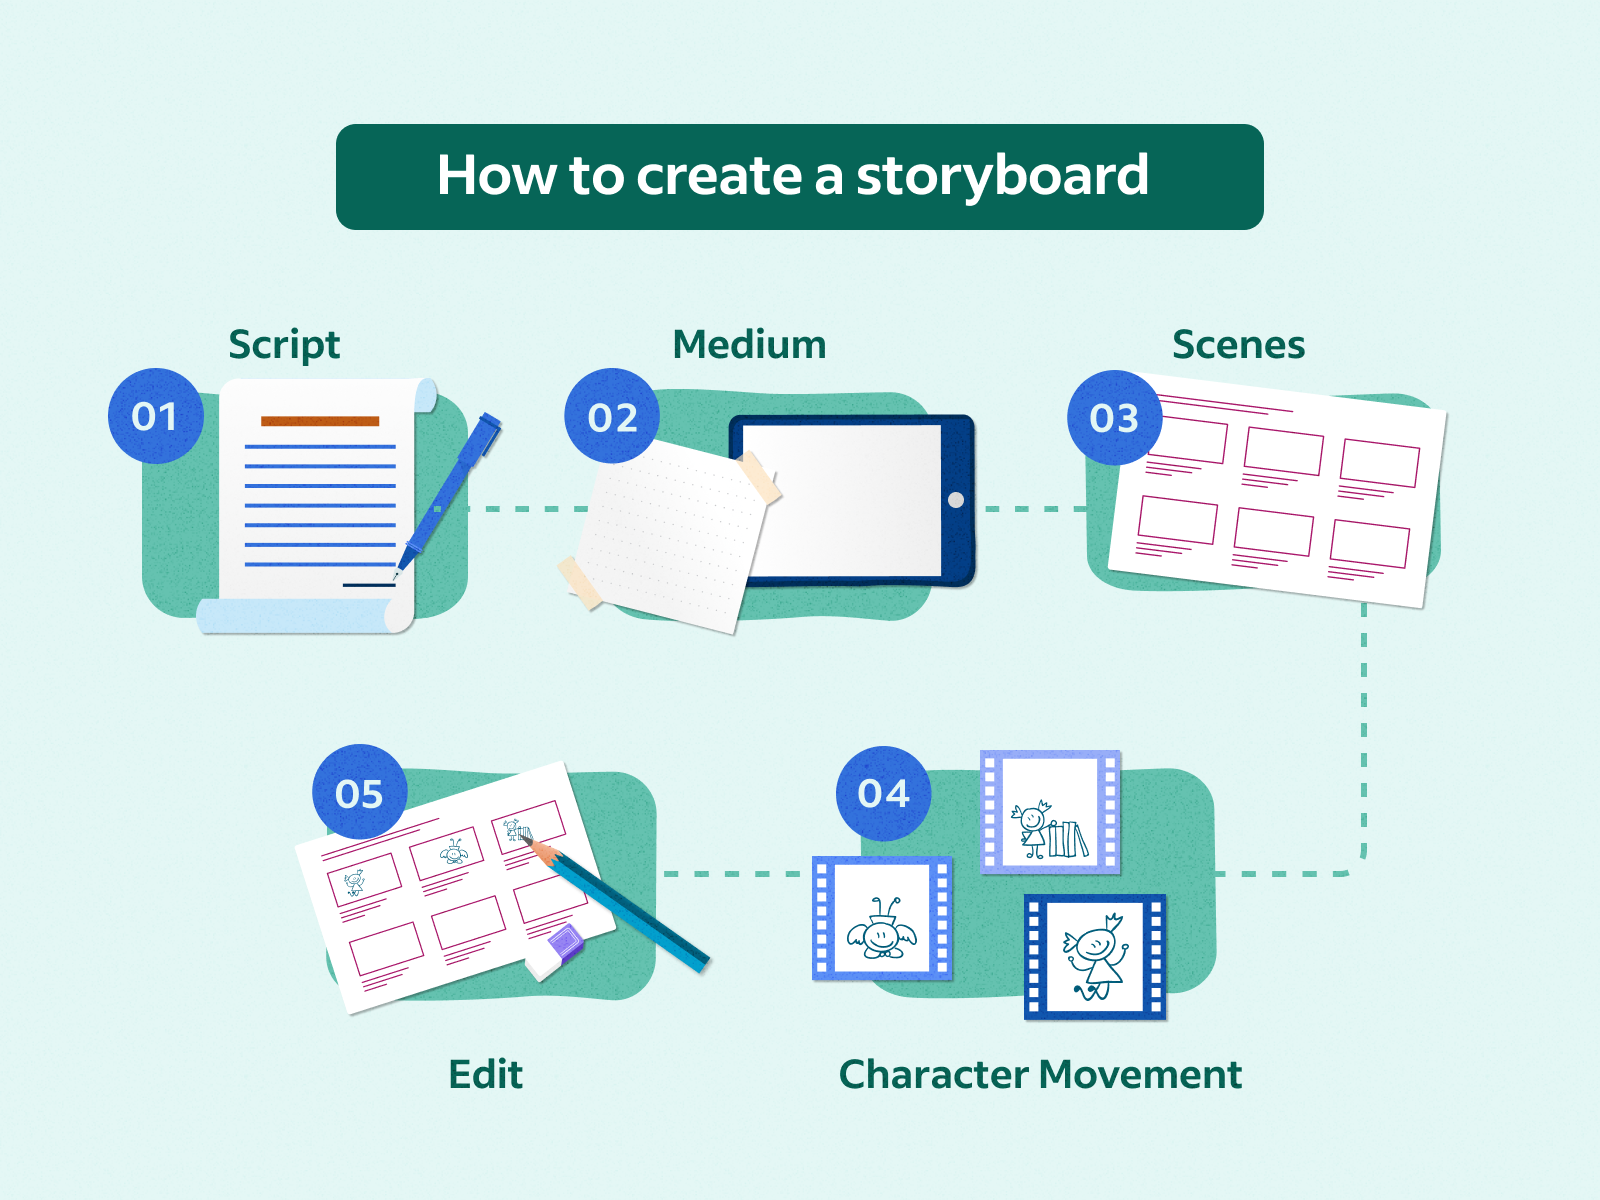 11 Storyboarding Apps To Organize & Inspire Young Writers